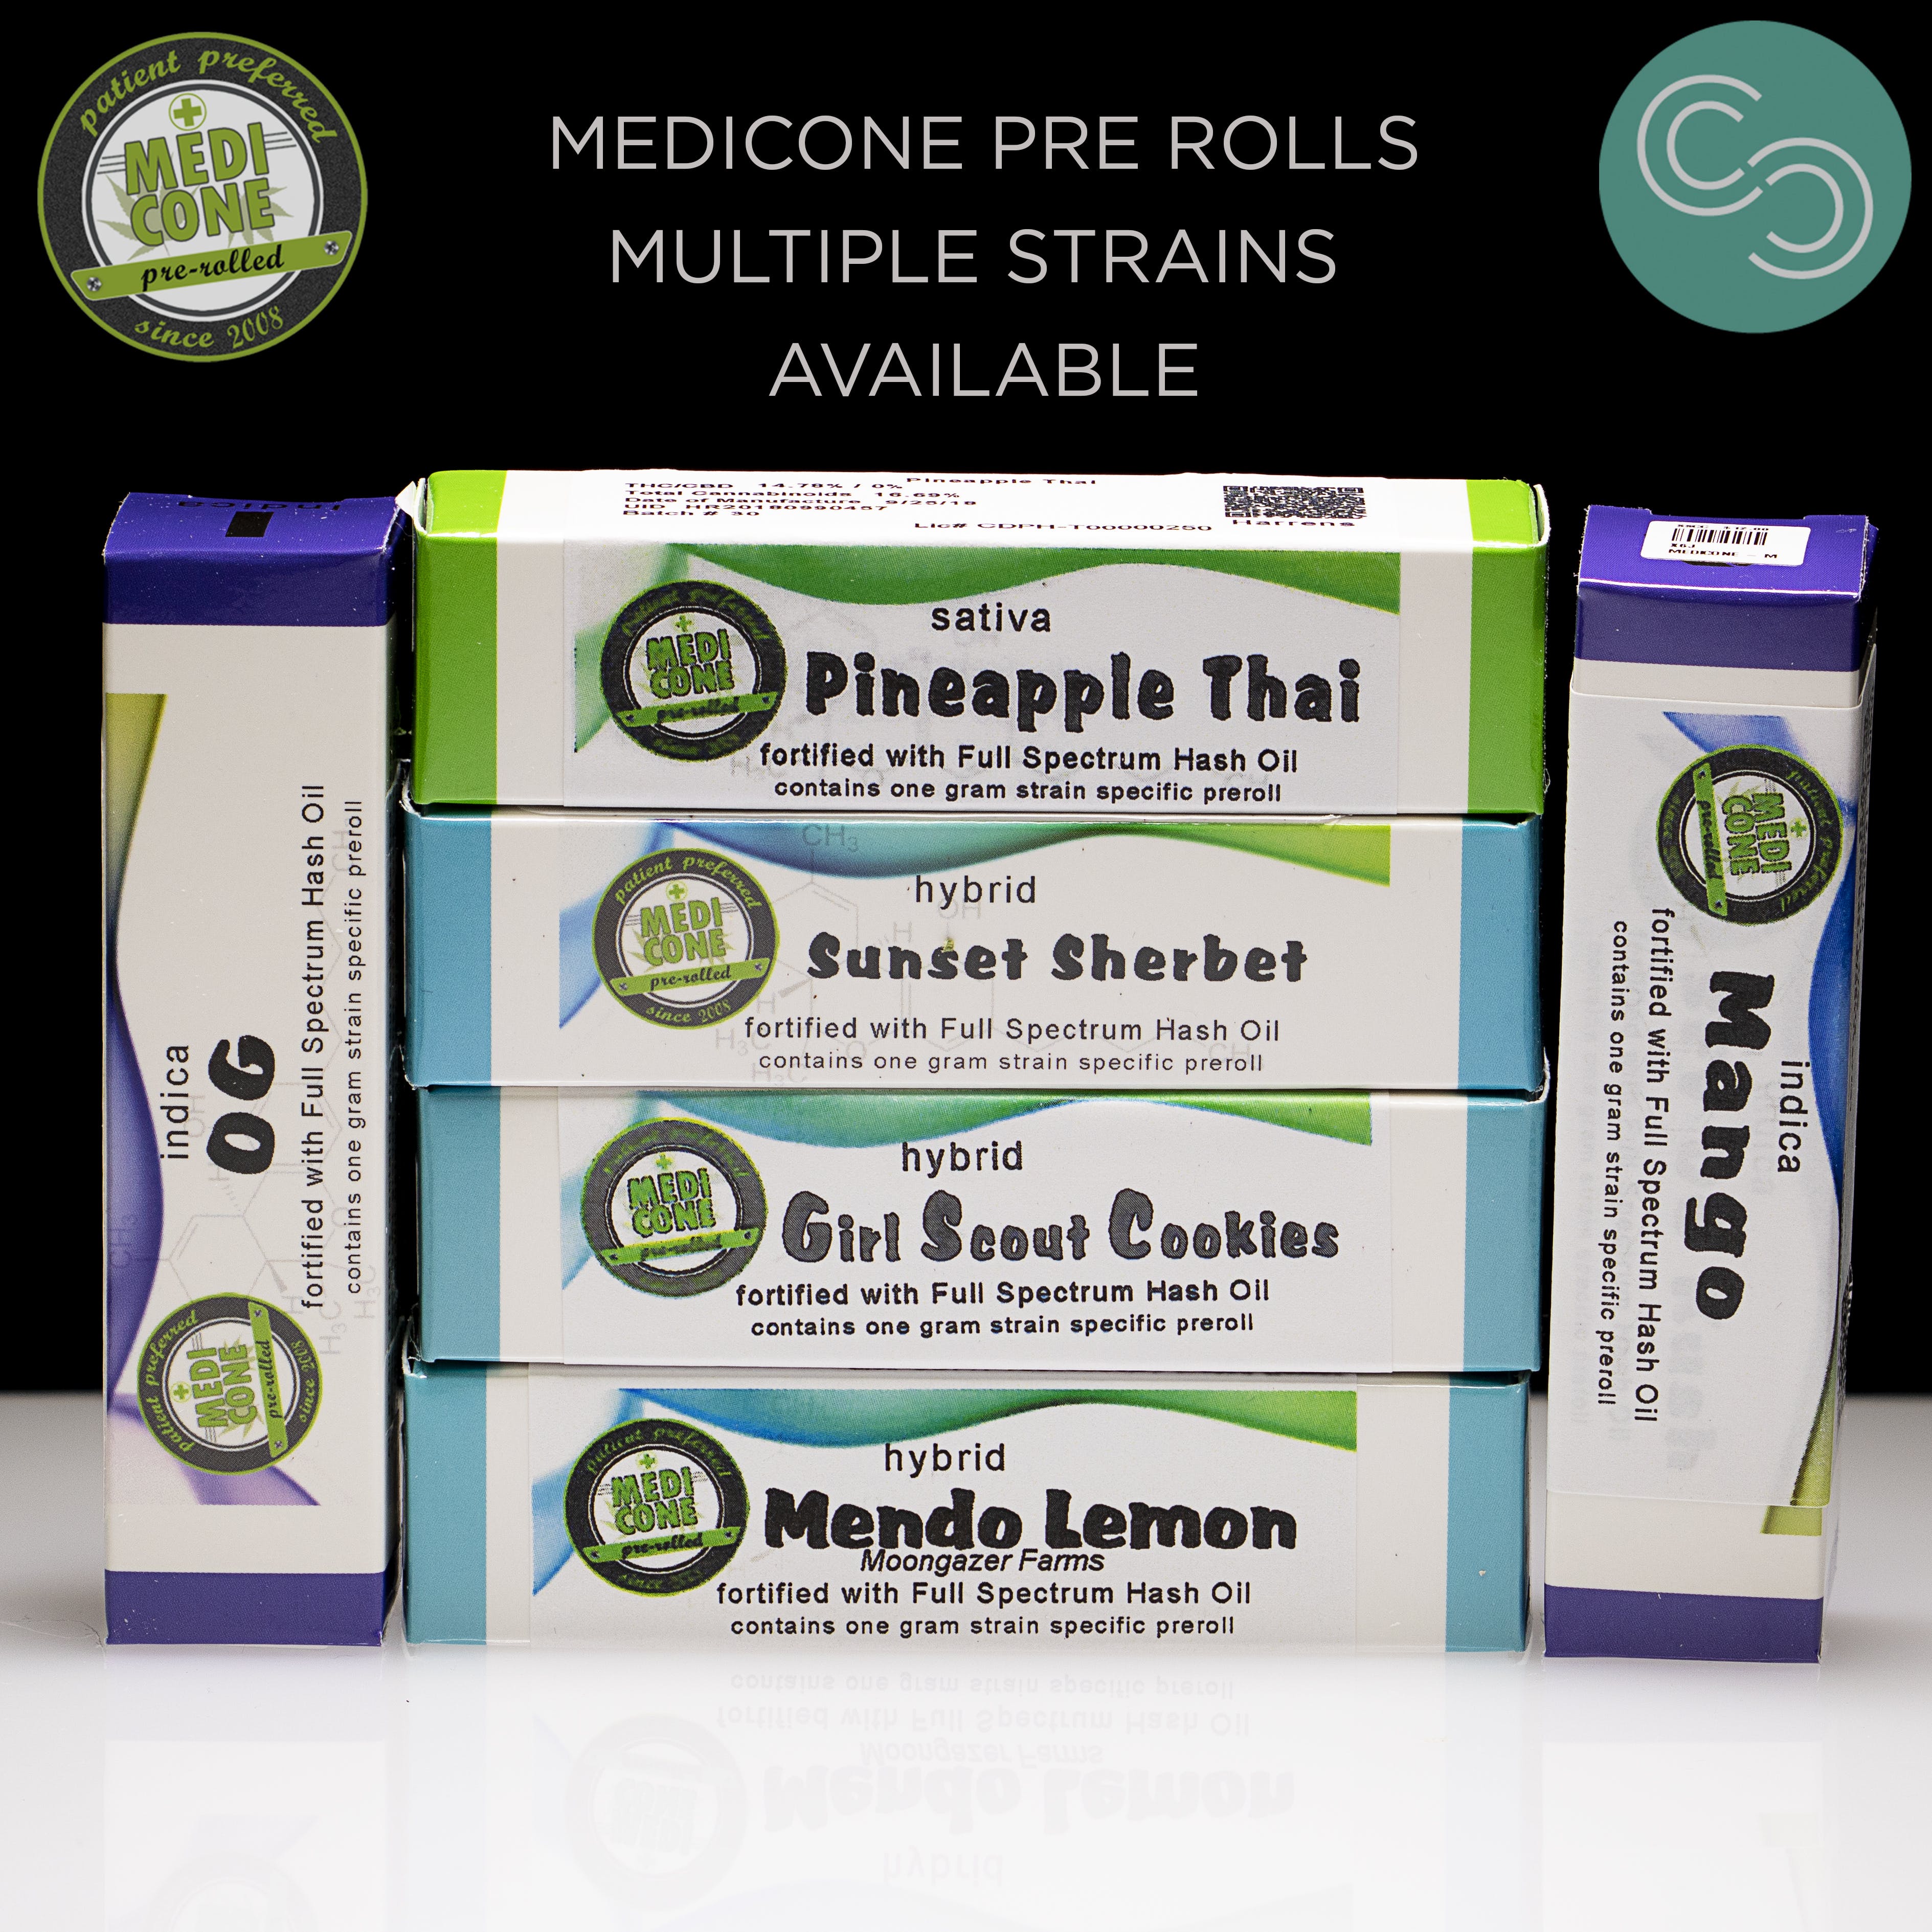 preroll-medicone-multiple-strains-available